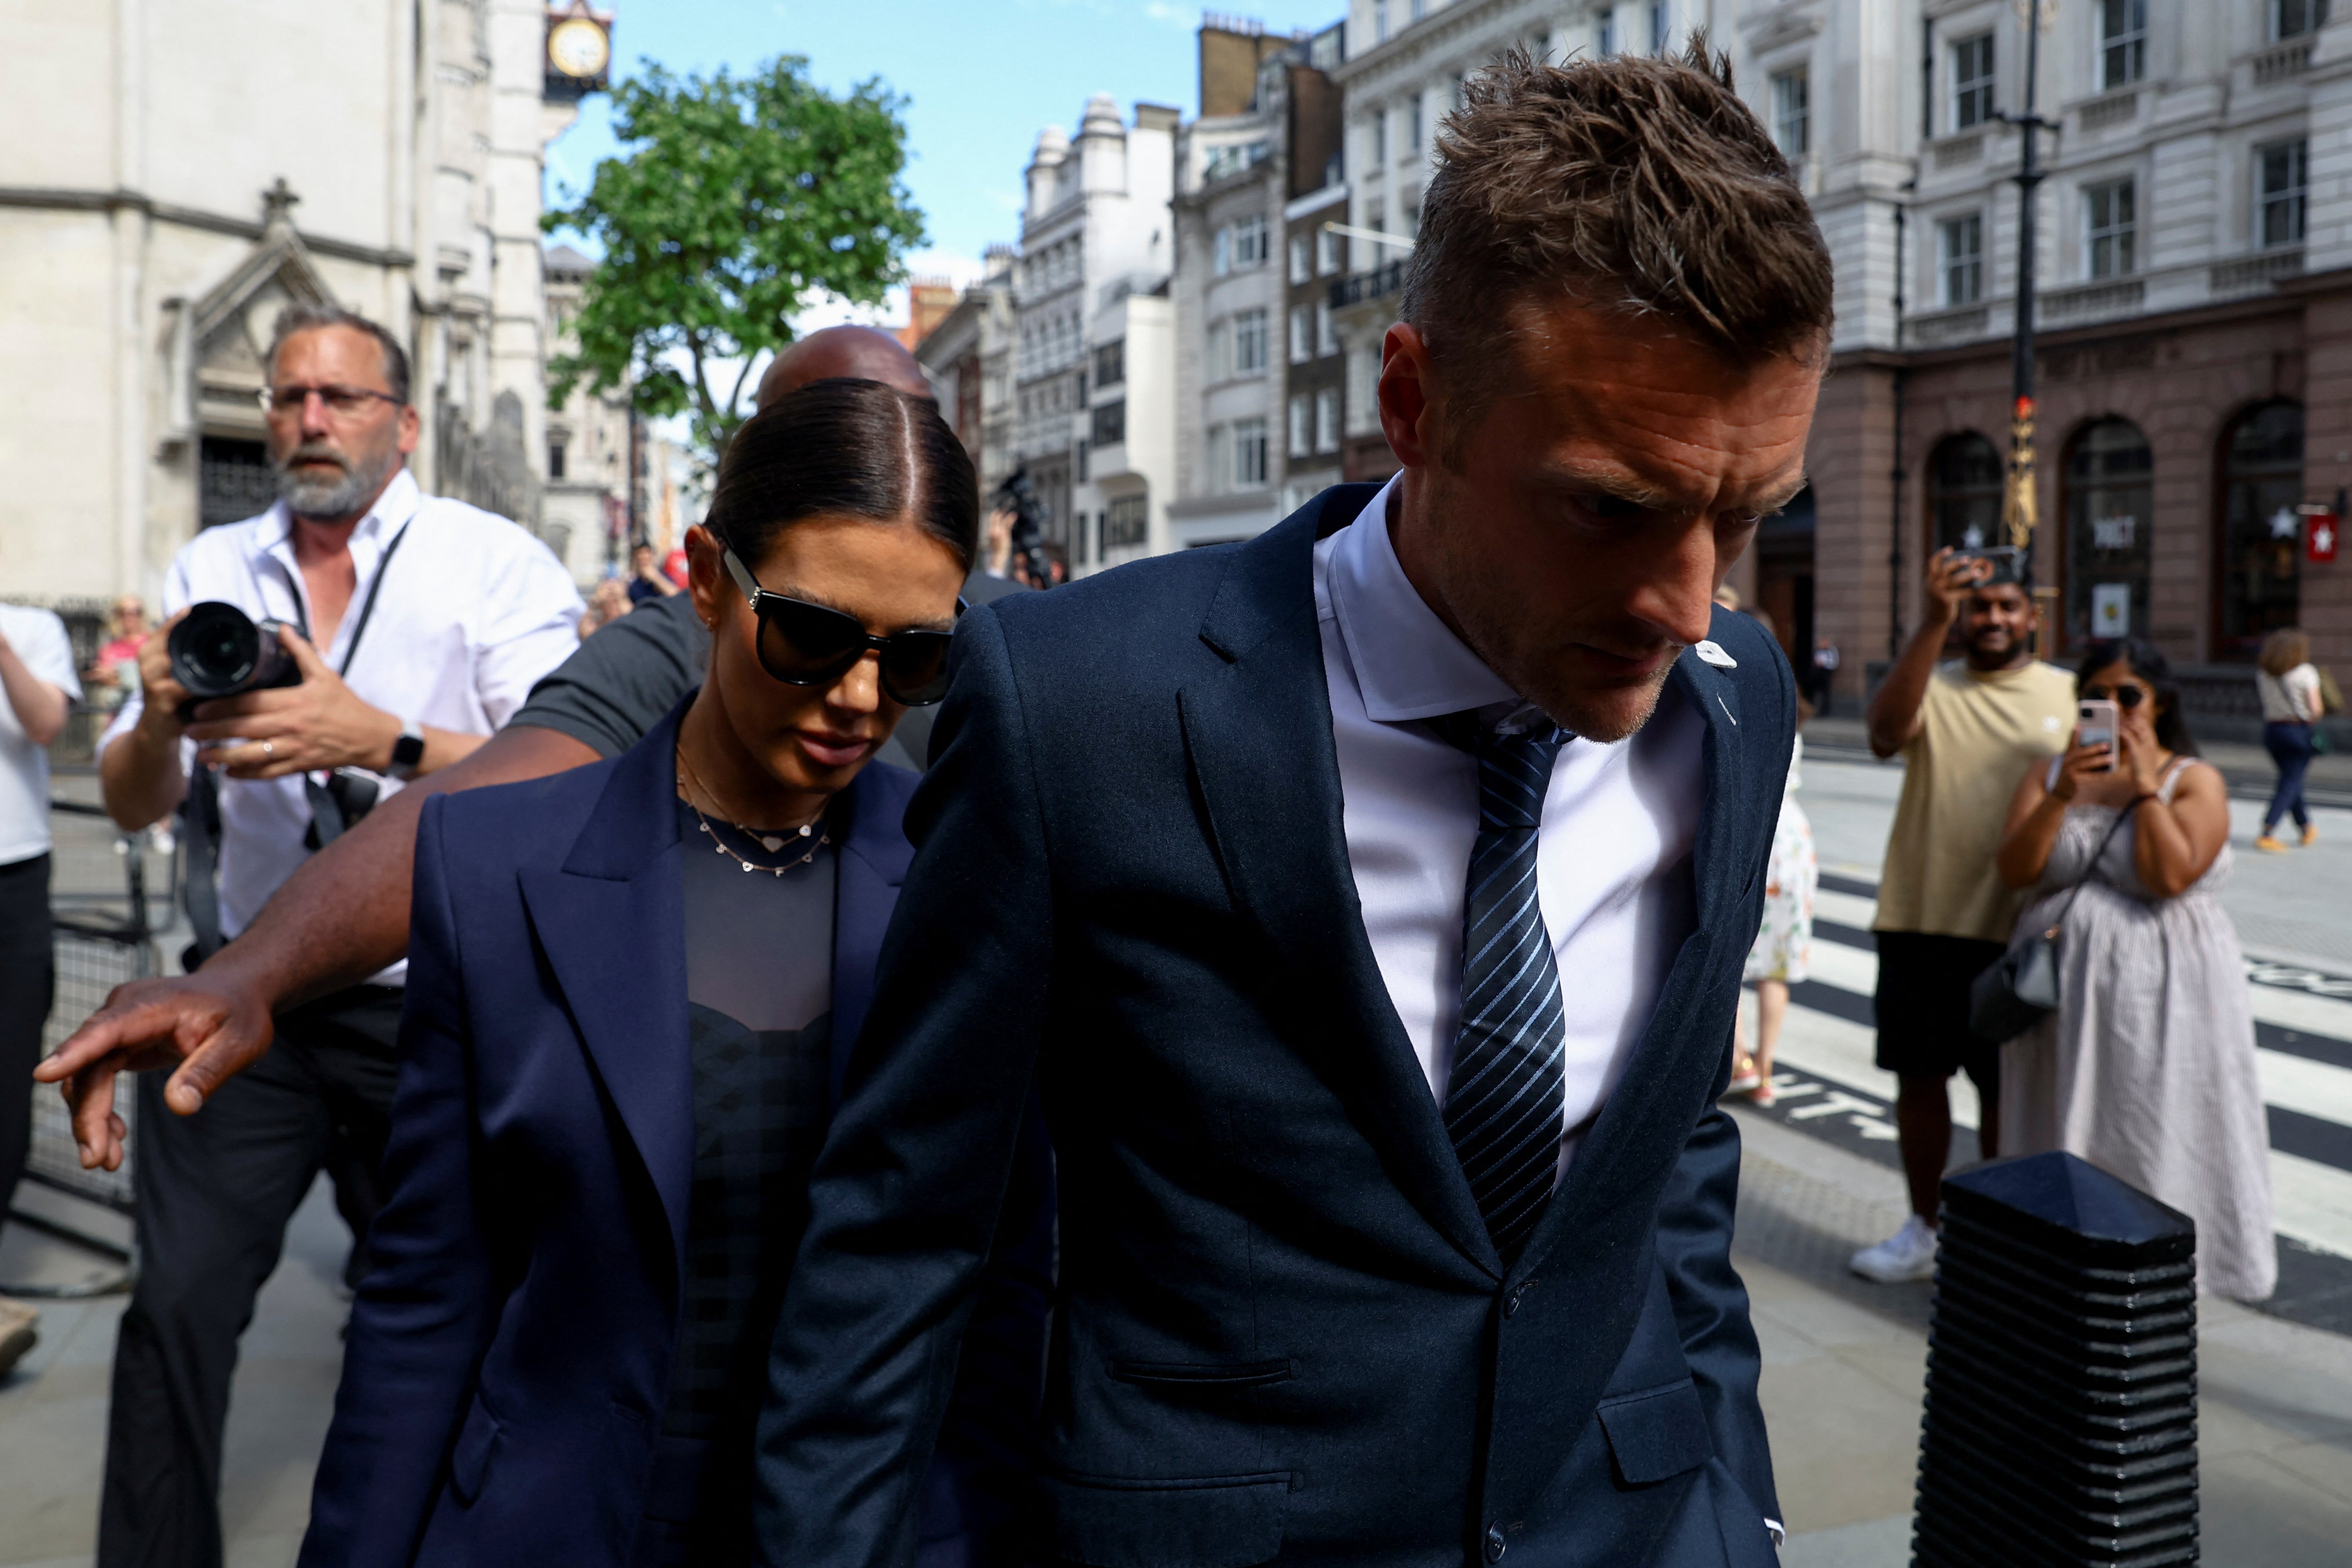 Jamie Vardy and his wife left the court early on Tuesday